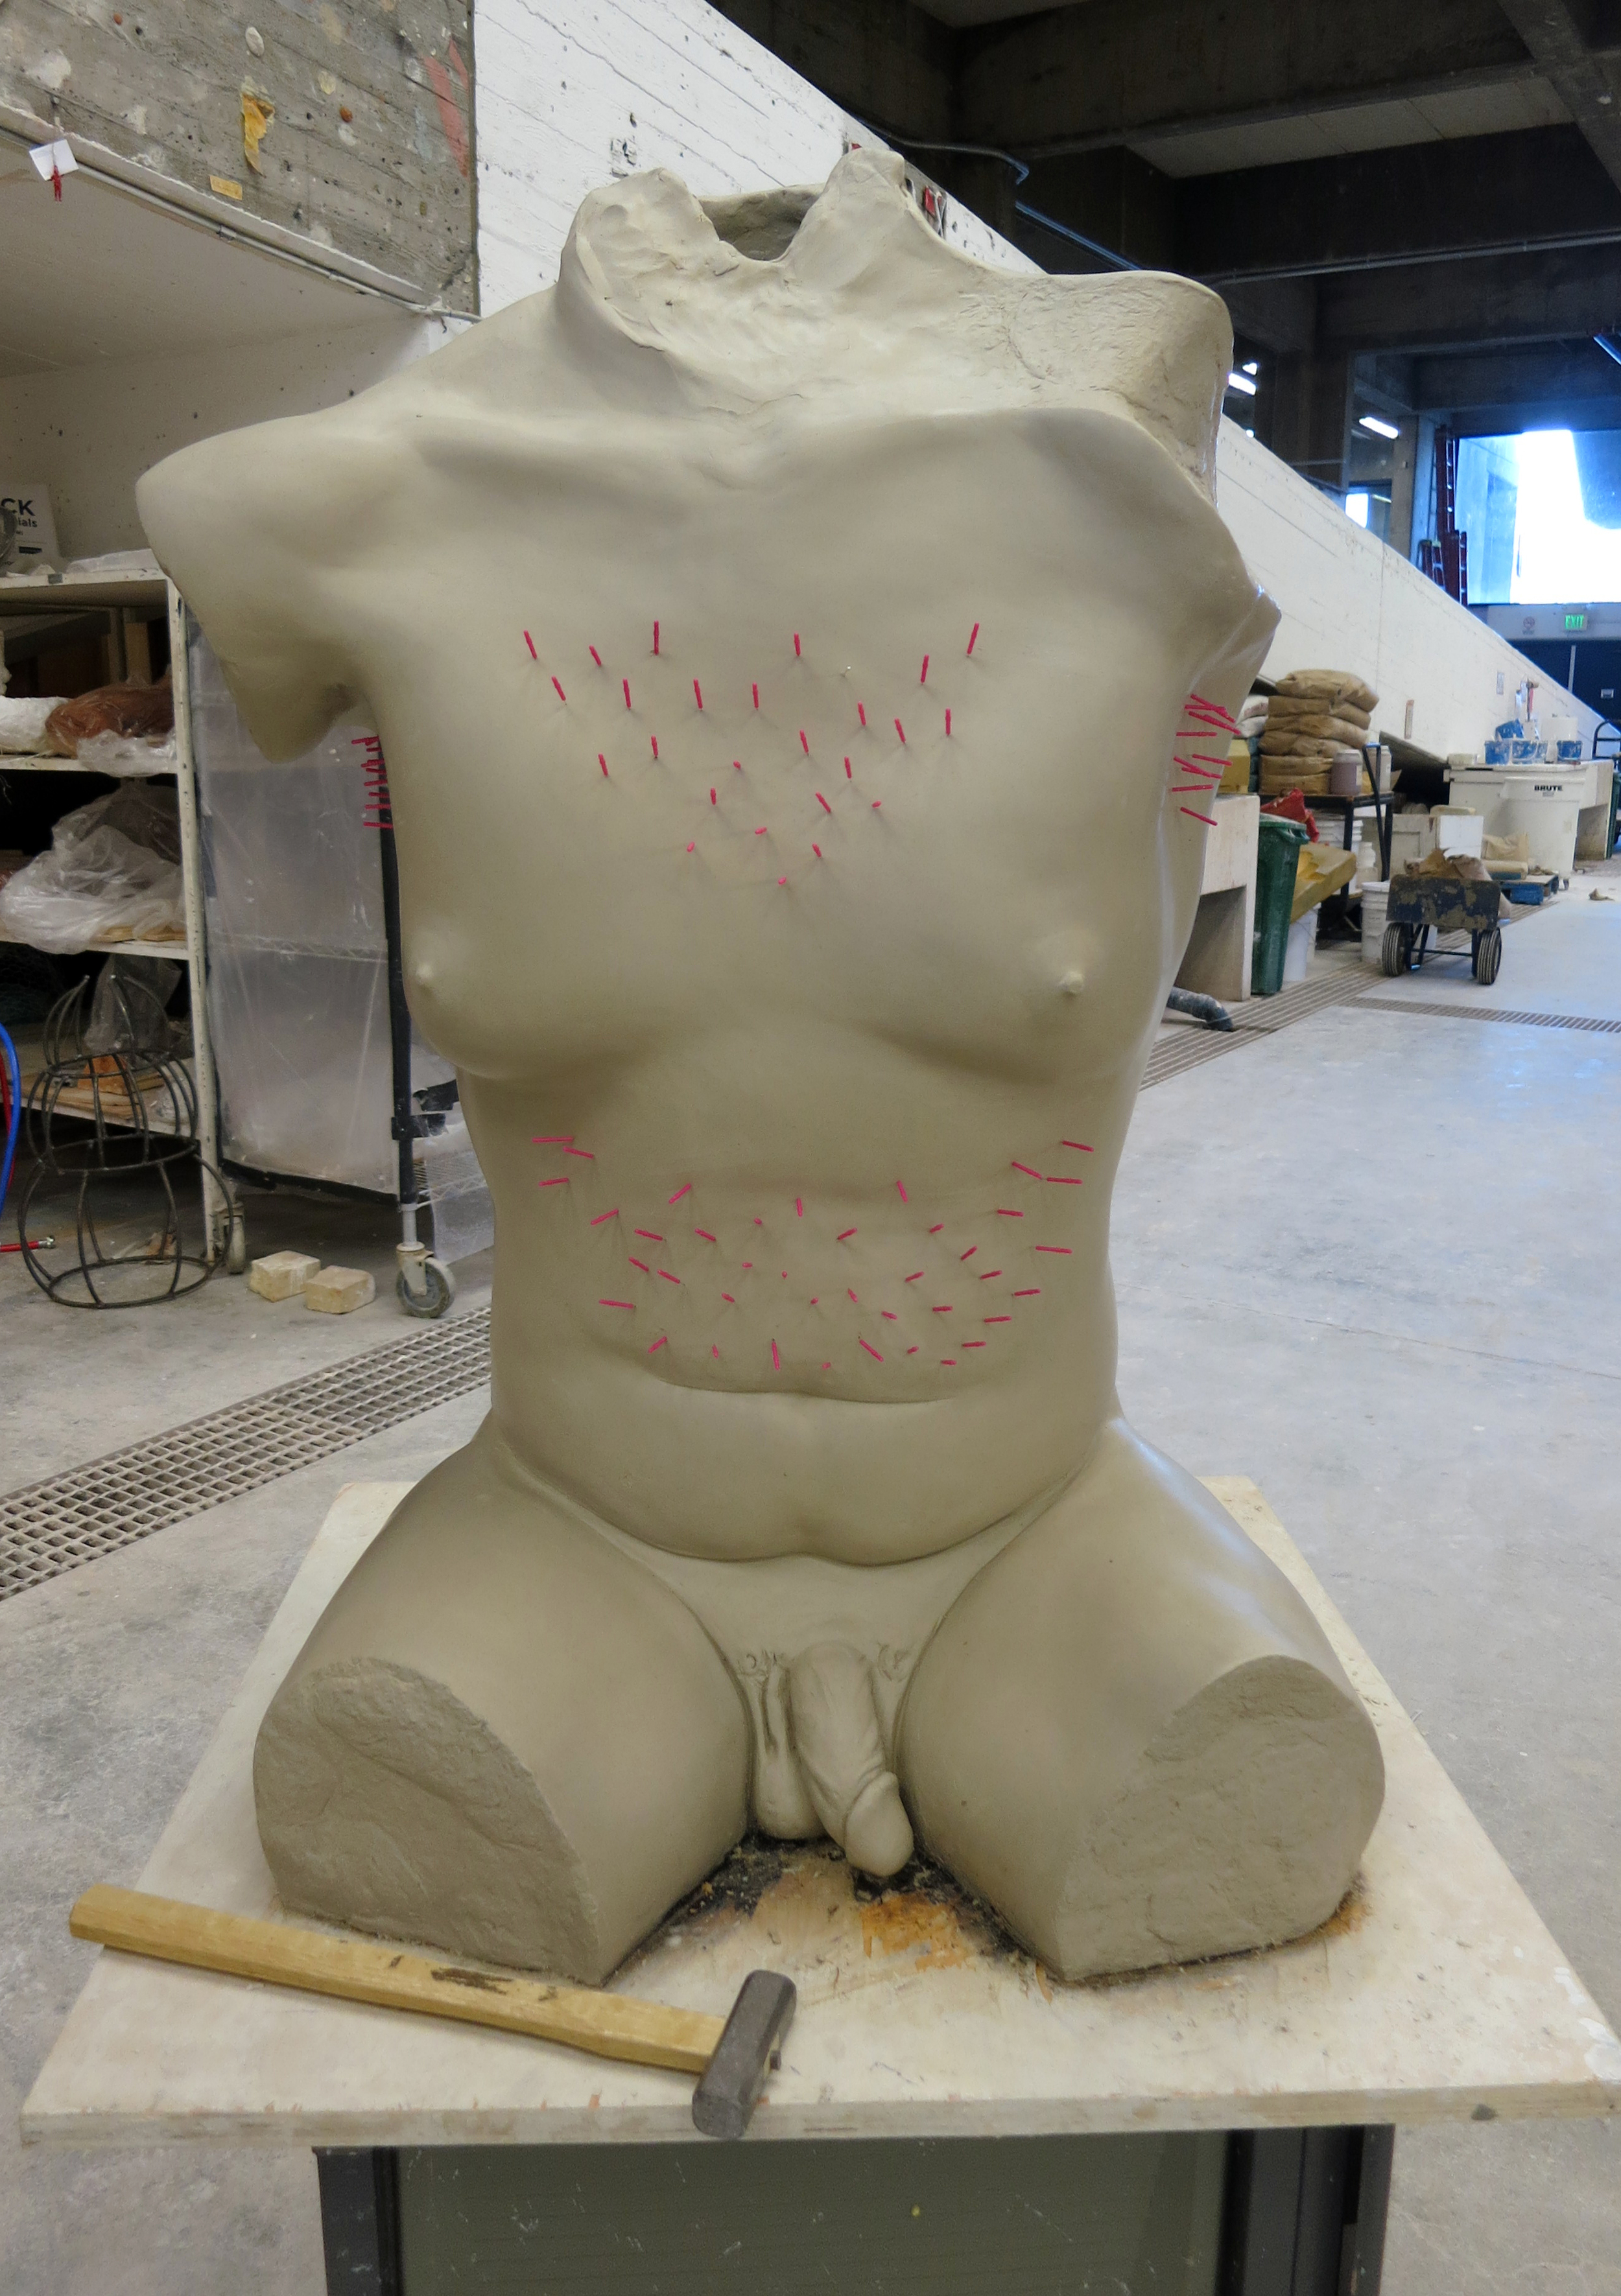   meat sweats, &nbsp;2015. in progress.&nbsp;  pink handled acupuncture needles inserted through leather-hard clay to create tiny holes from which the sculpture 'sweats'&nbsp; 